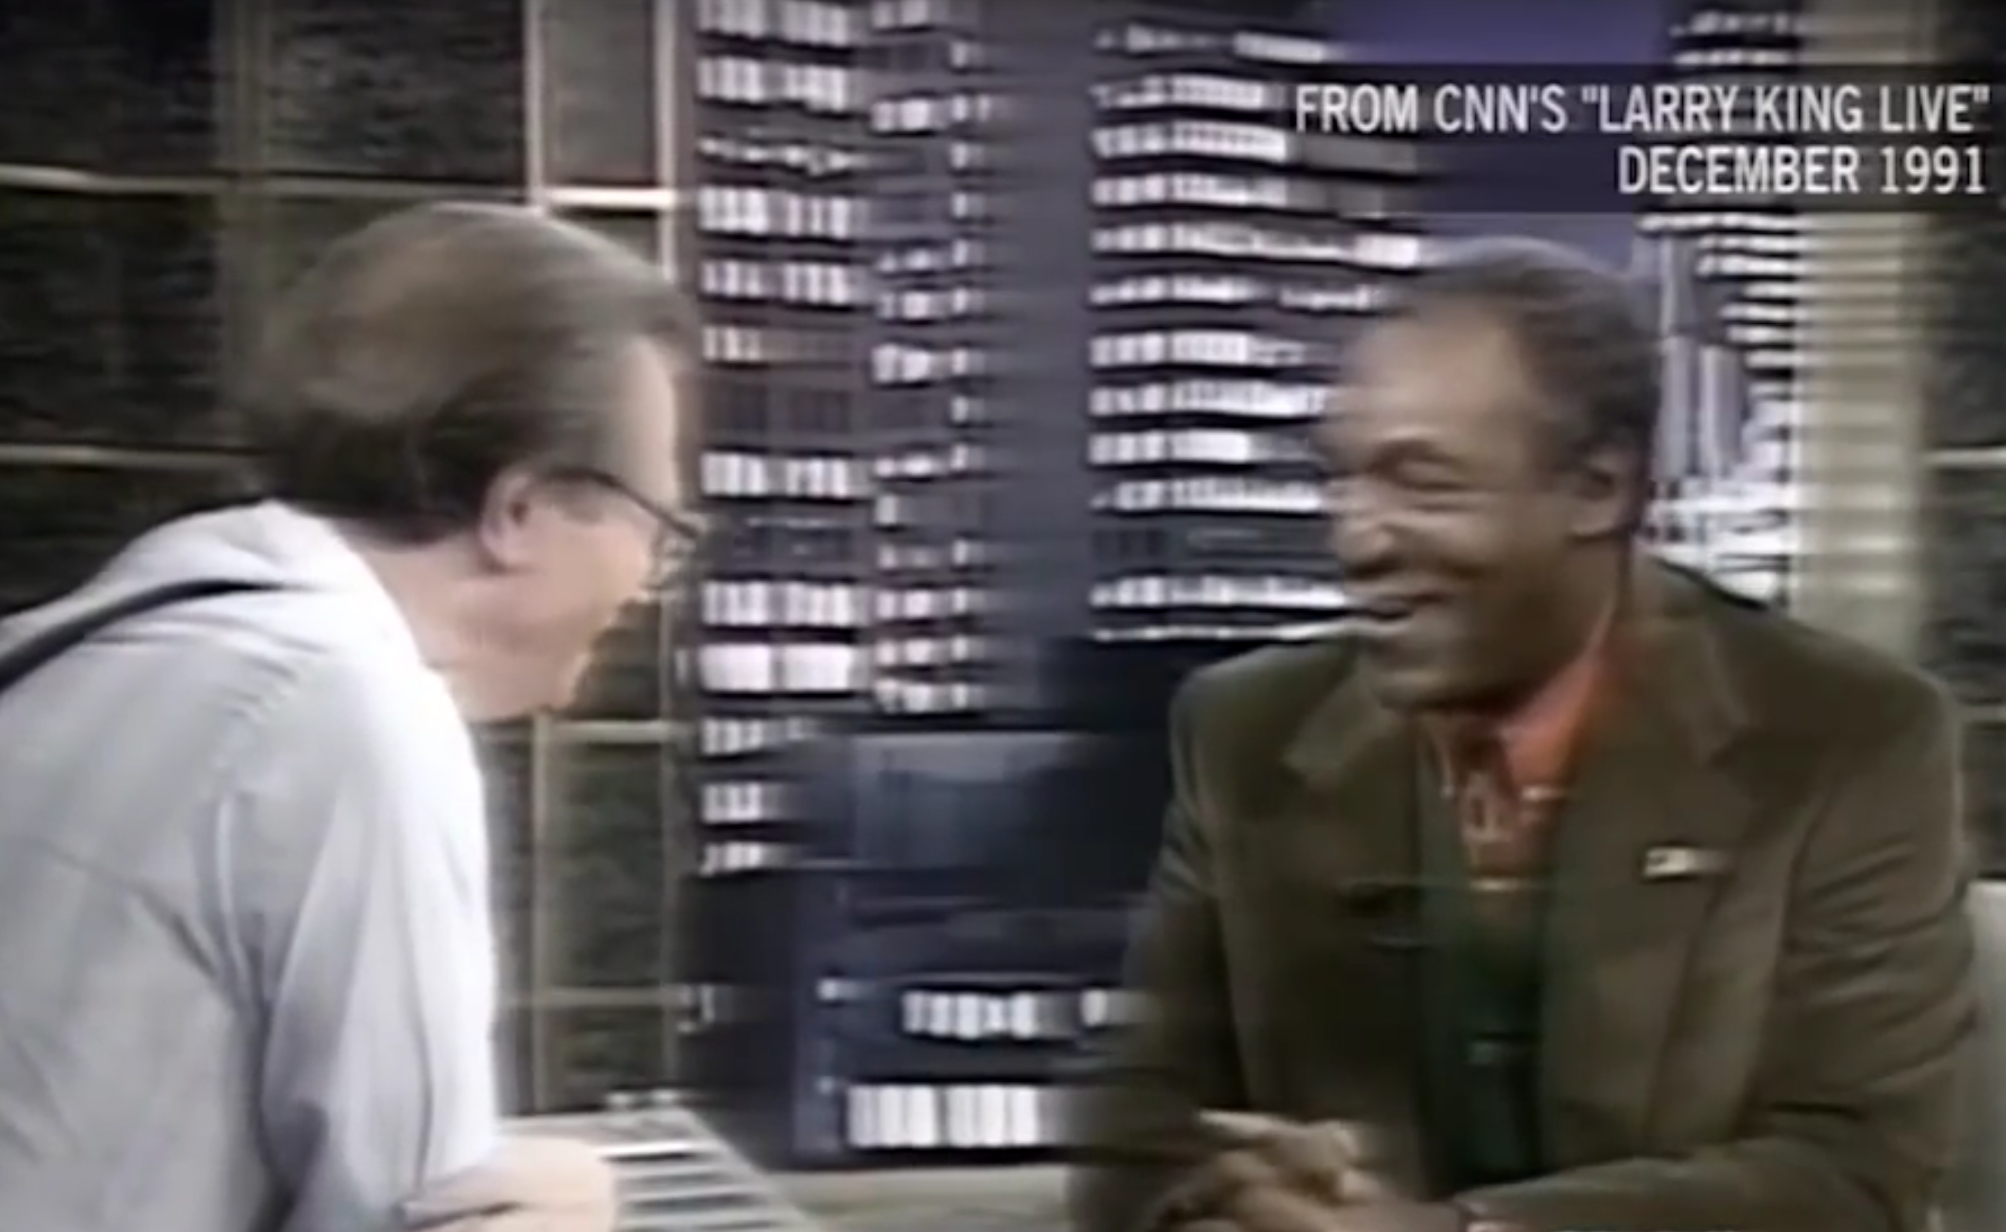 Cosby and Larry King